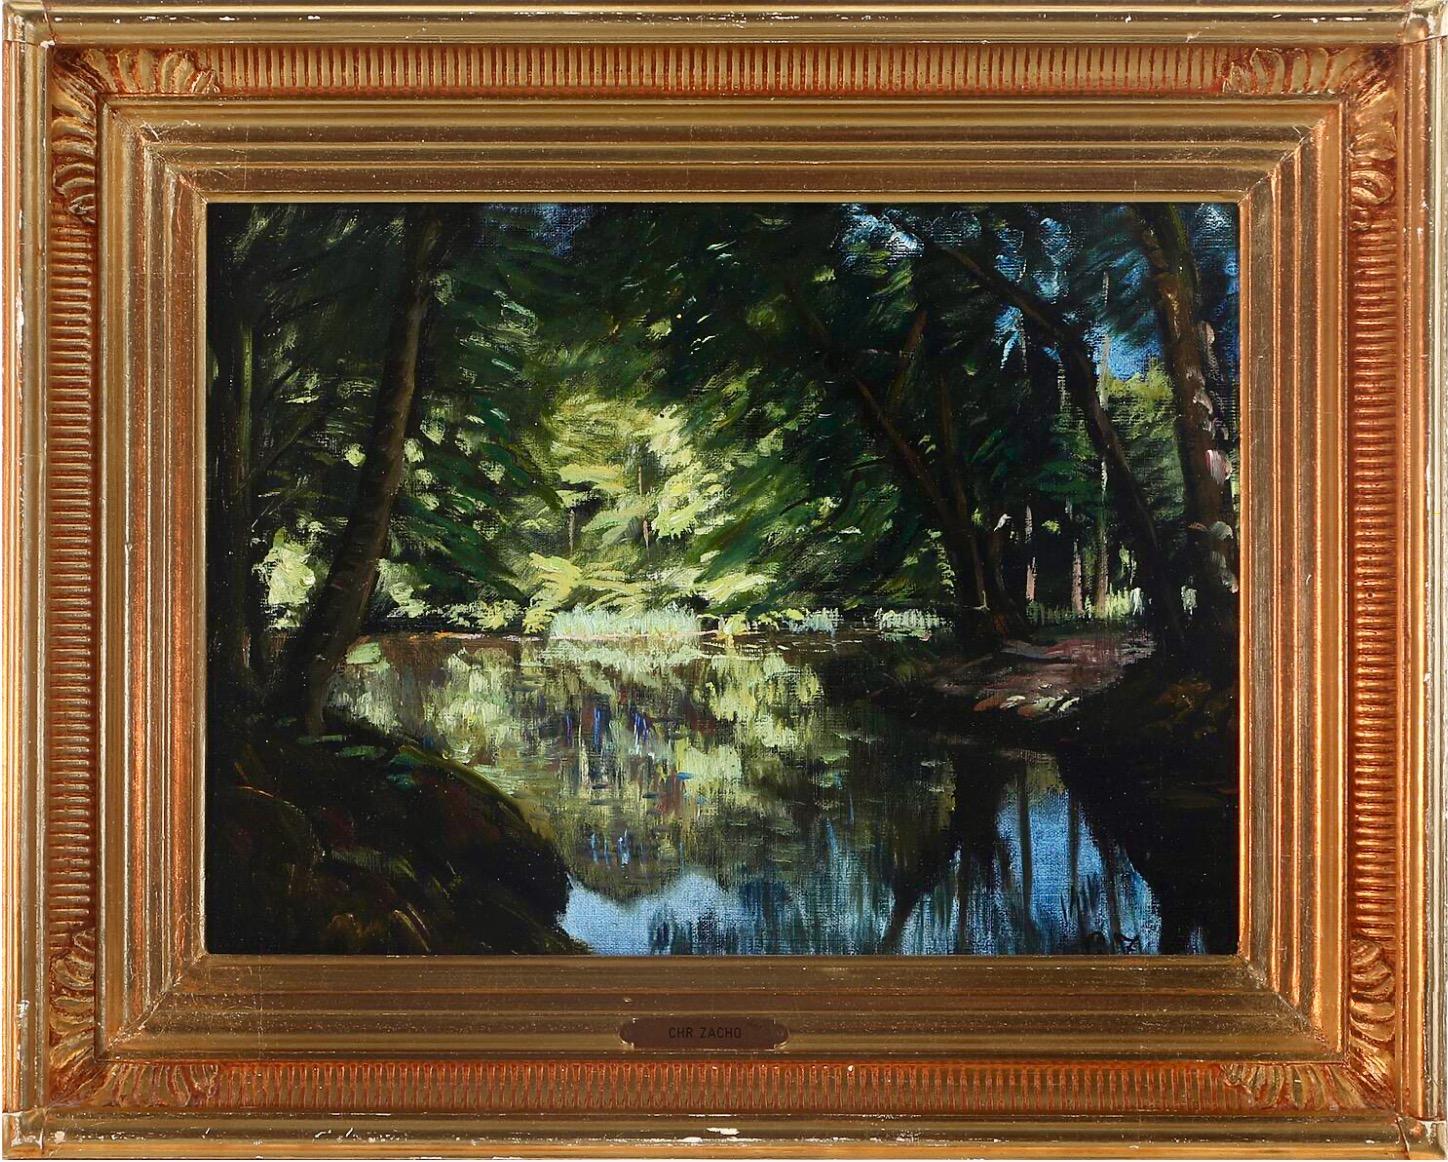 Christian Zacho, A Still Standing Stream with Shading Trees and a Sunlit Opening